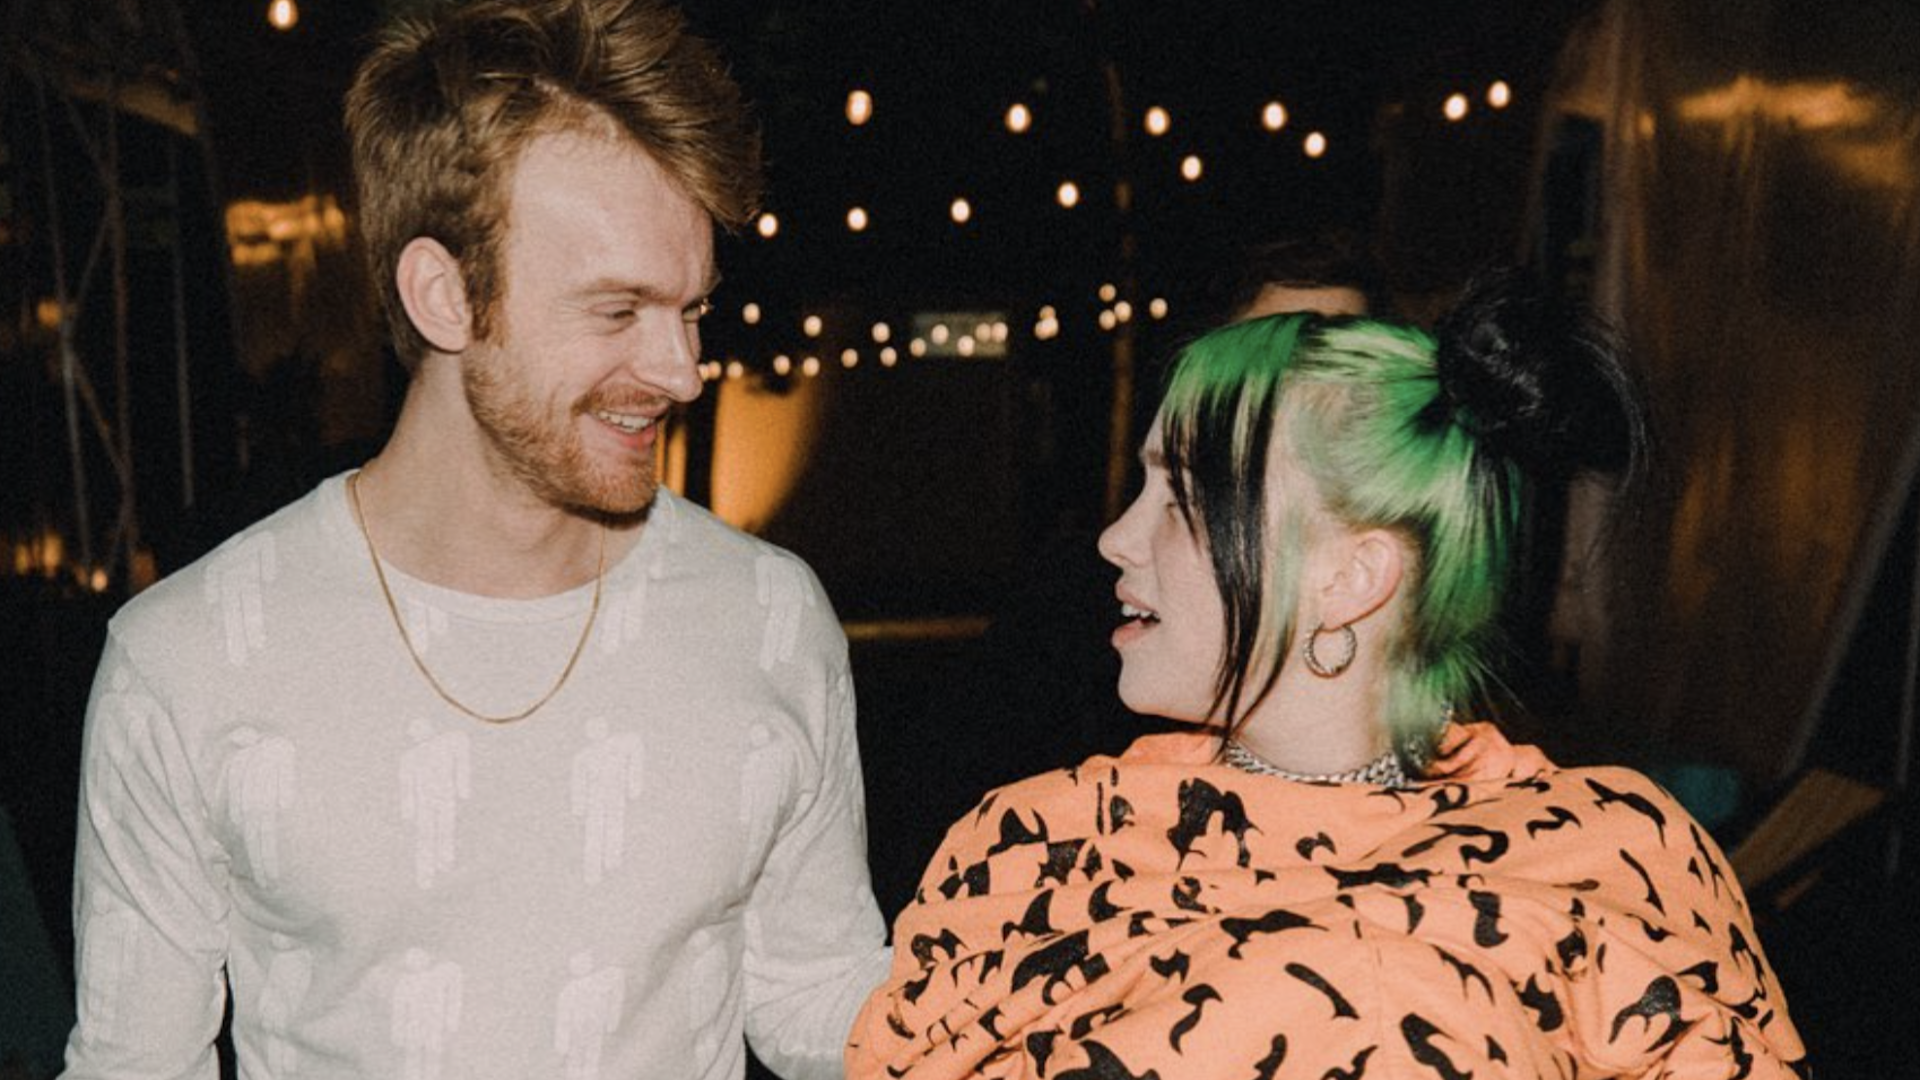 Billie Eilish and her brother Finneas